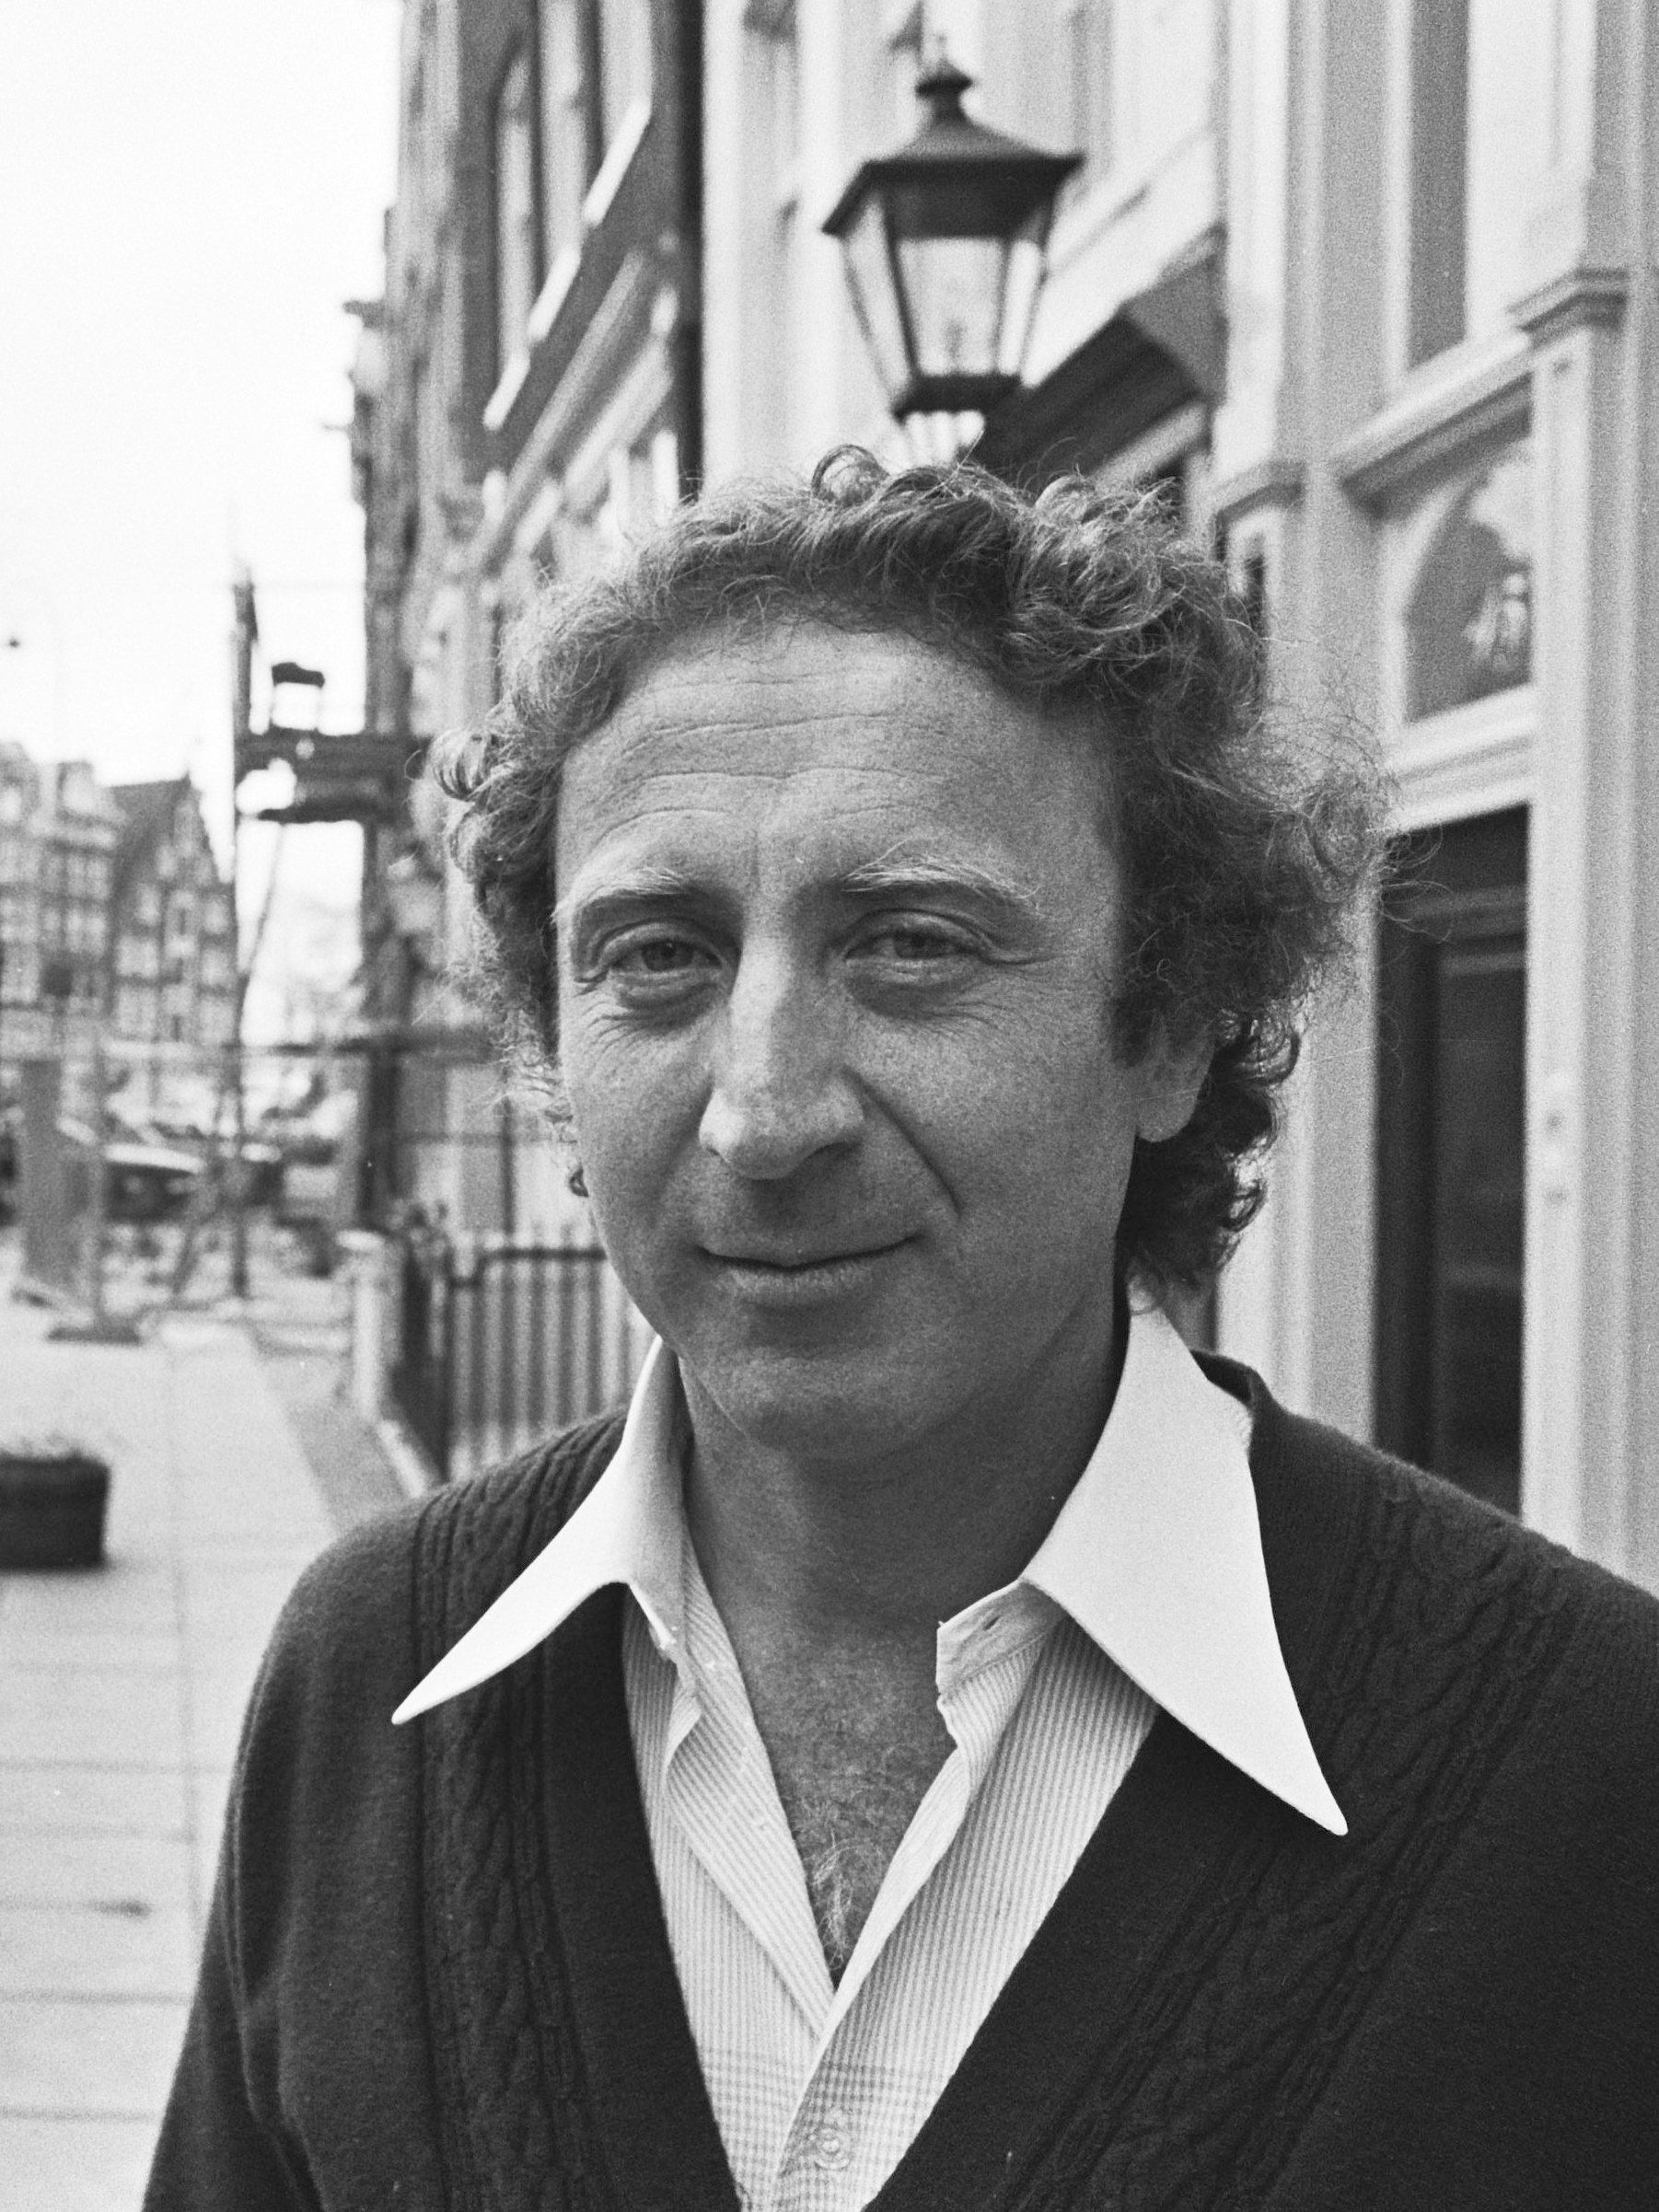 Willie Wonka star Gene Wilder kept his Alzheimer’s diagnosis secret out of concern for his young fans.